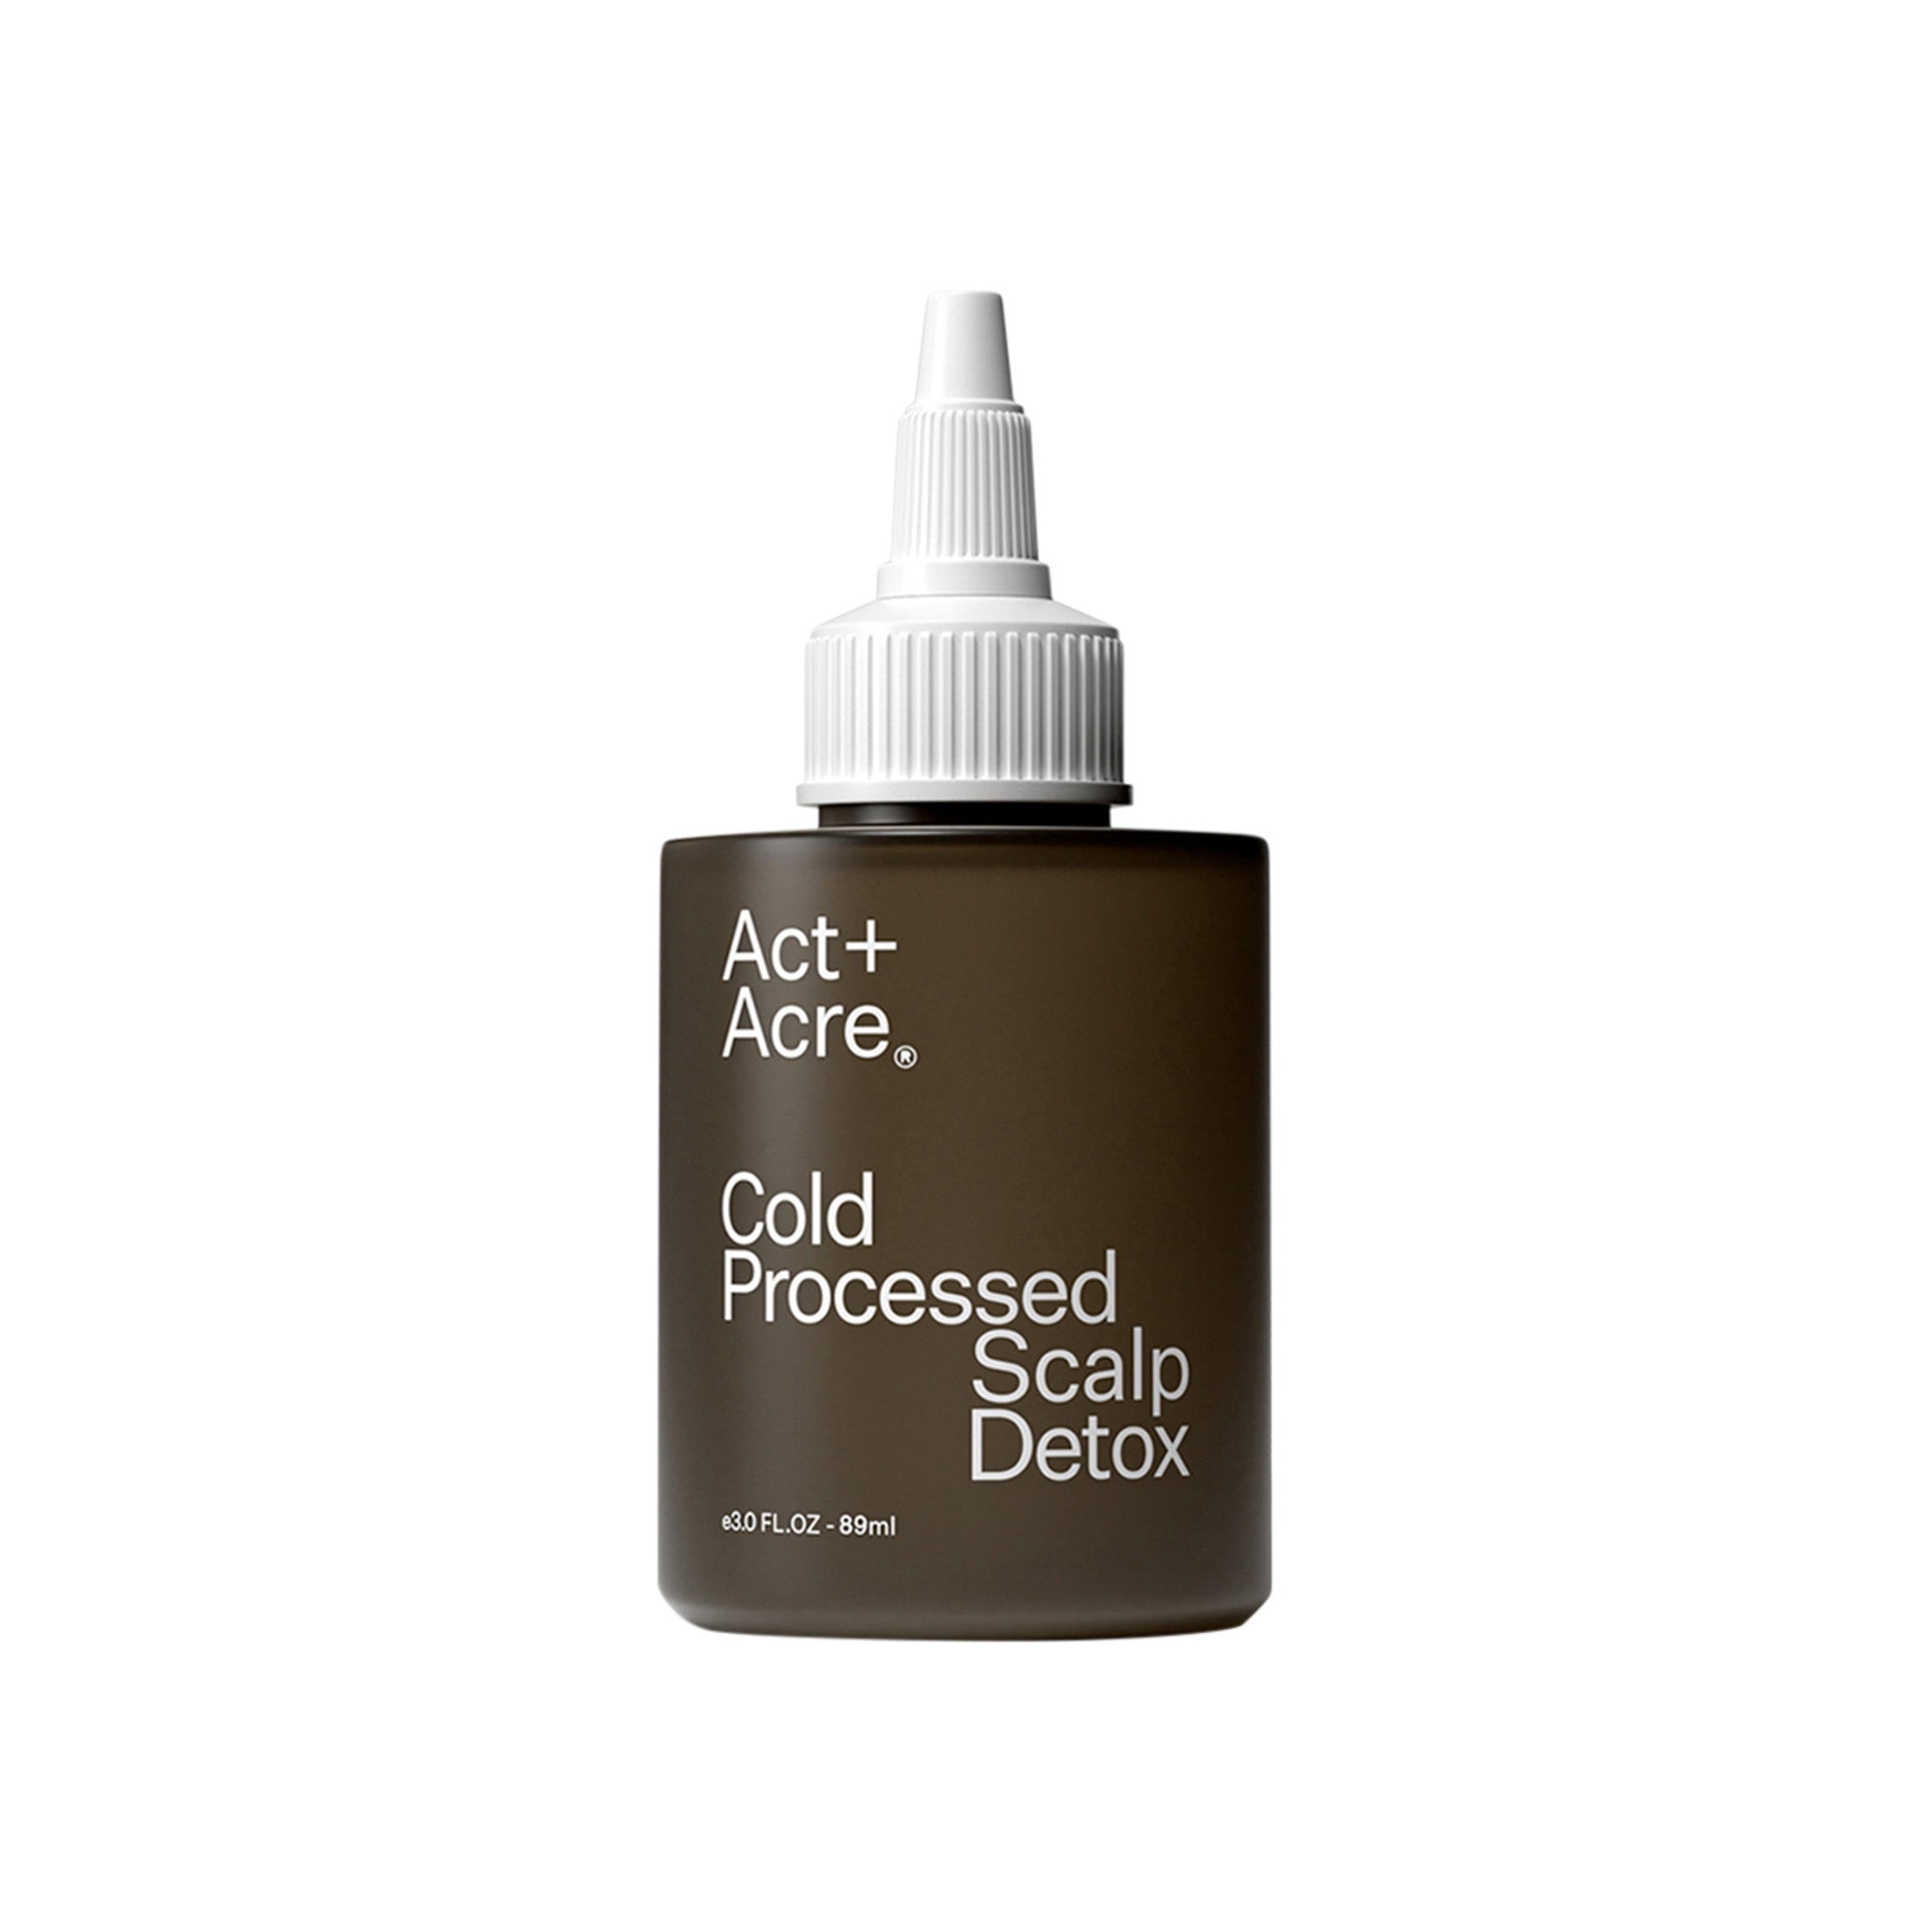 Act+Acre Cold Processed Scalp Detox main image.